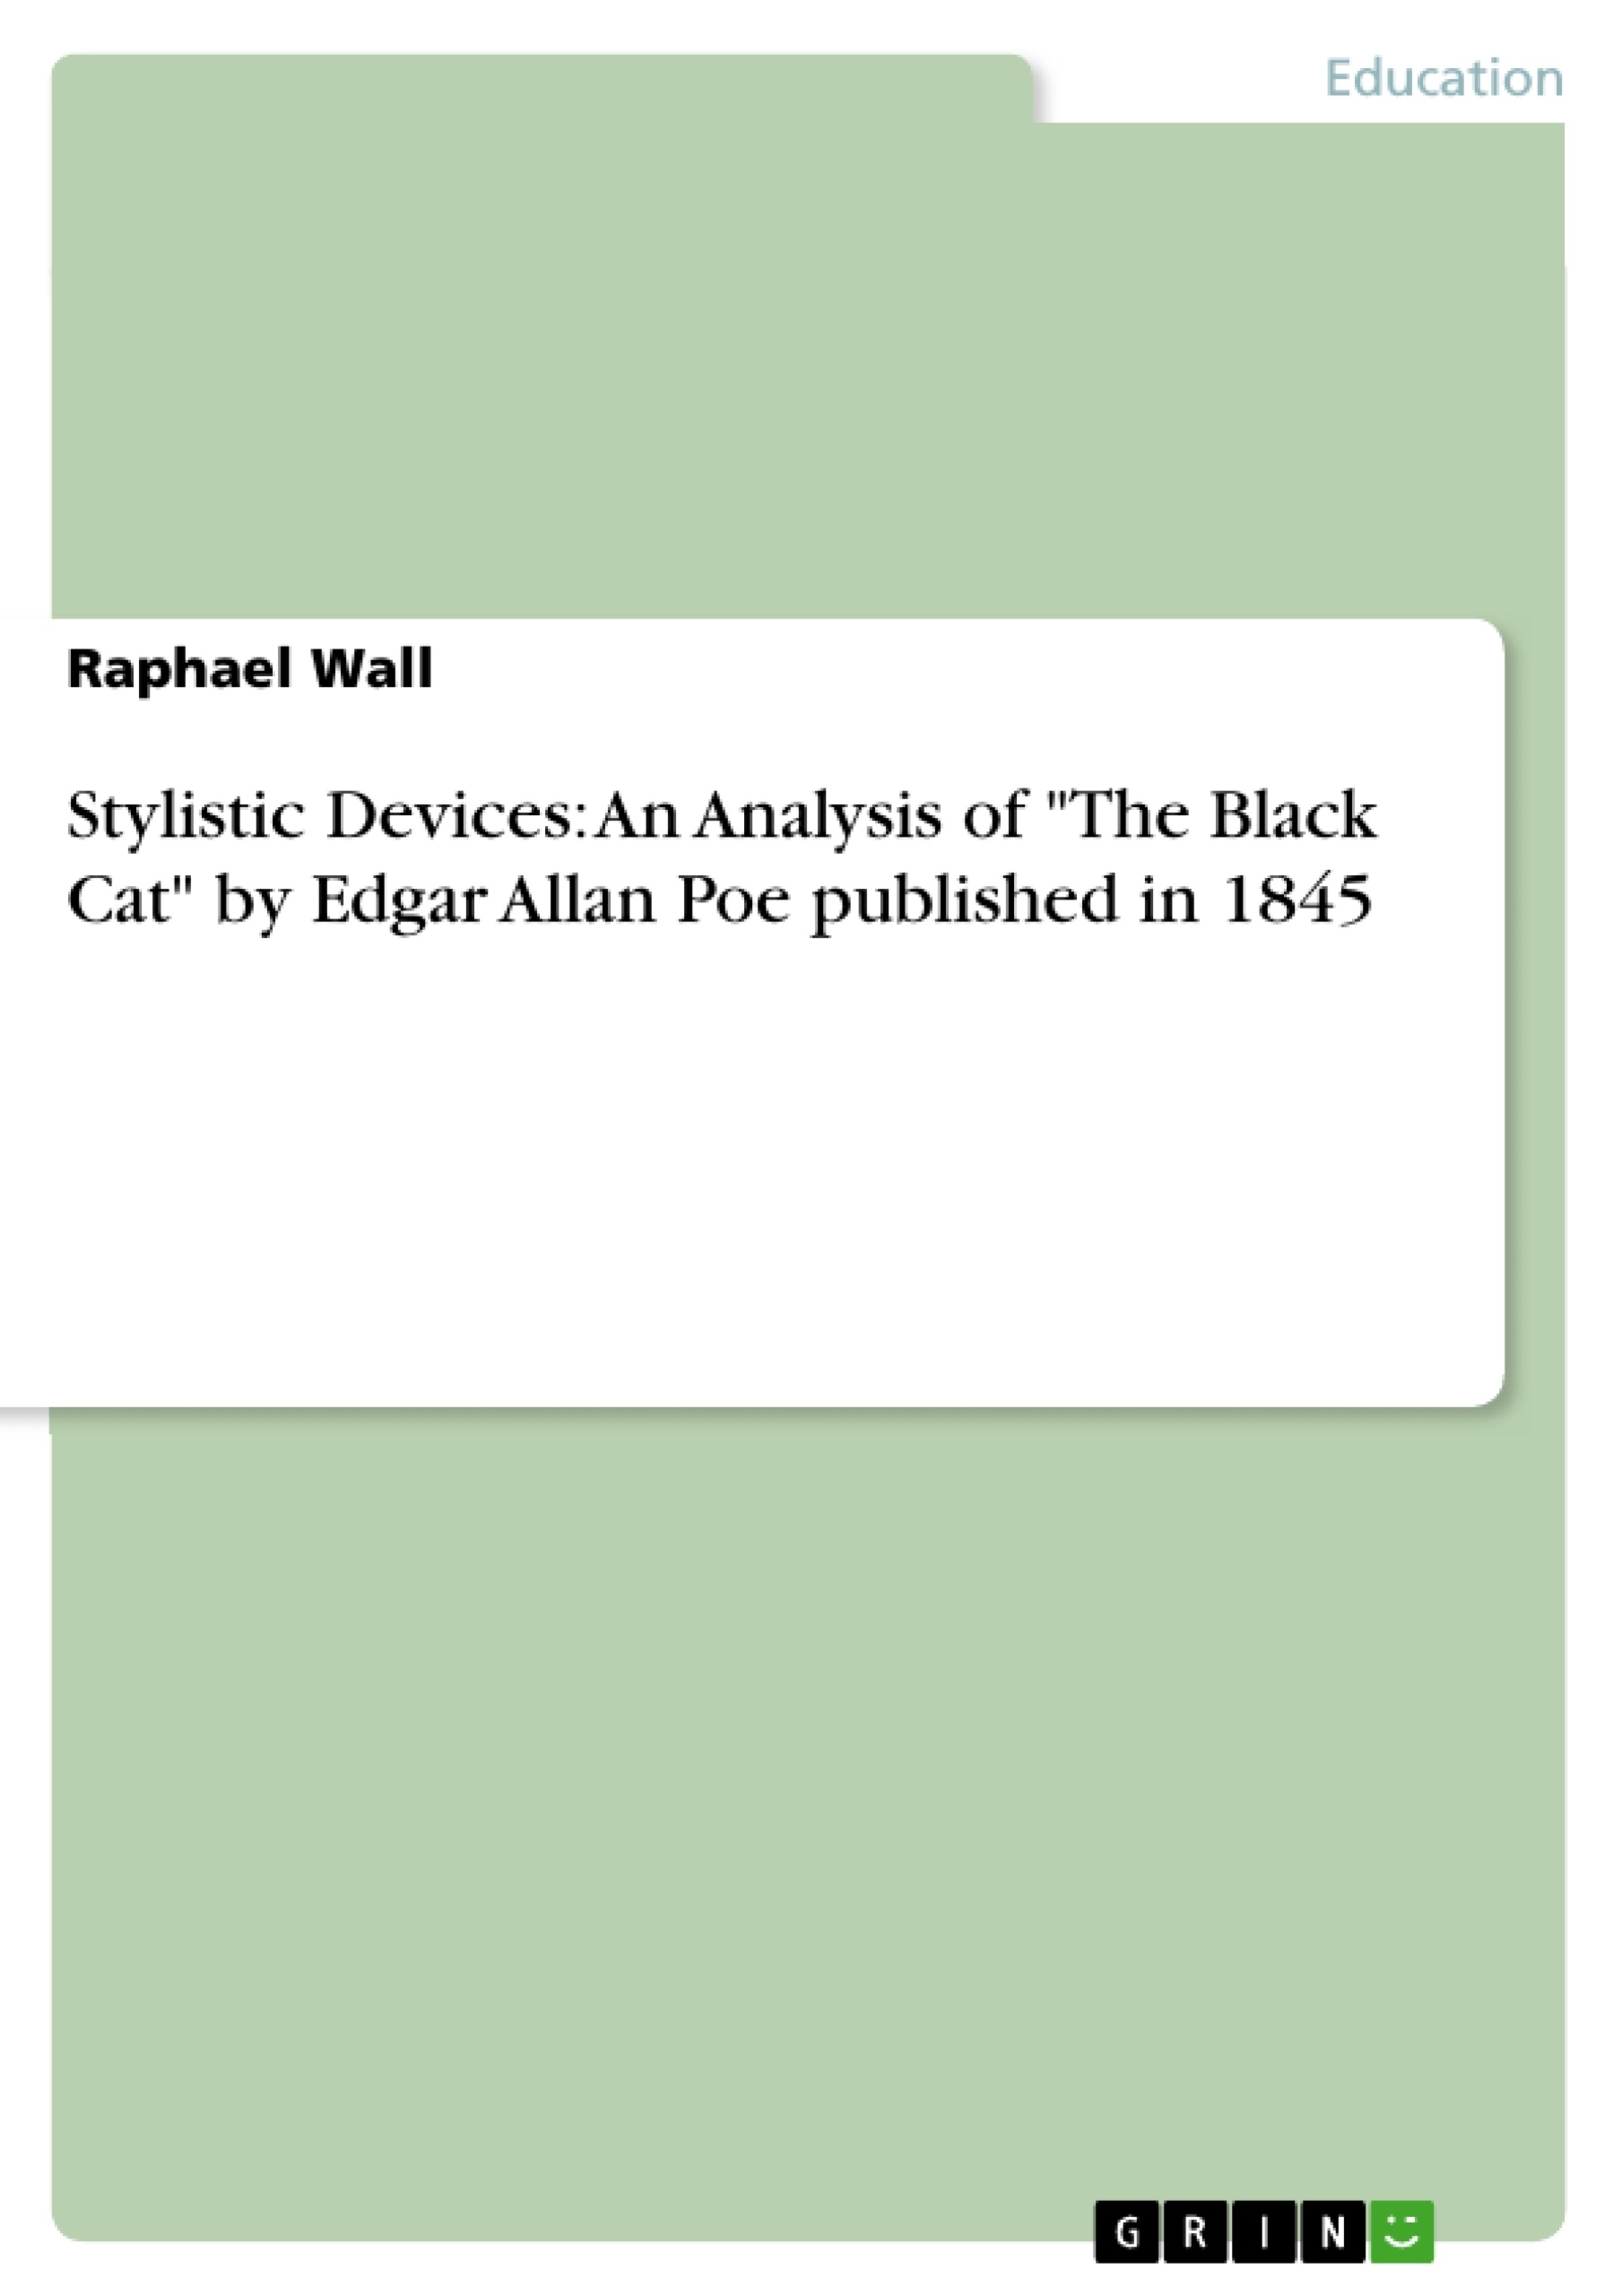 Stylistic Devices: An Analysis of "The Black Cat" by Edgar Allan